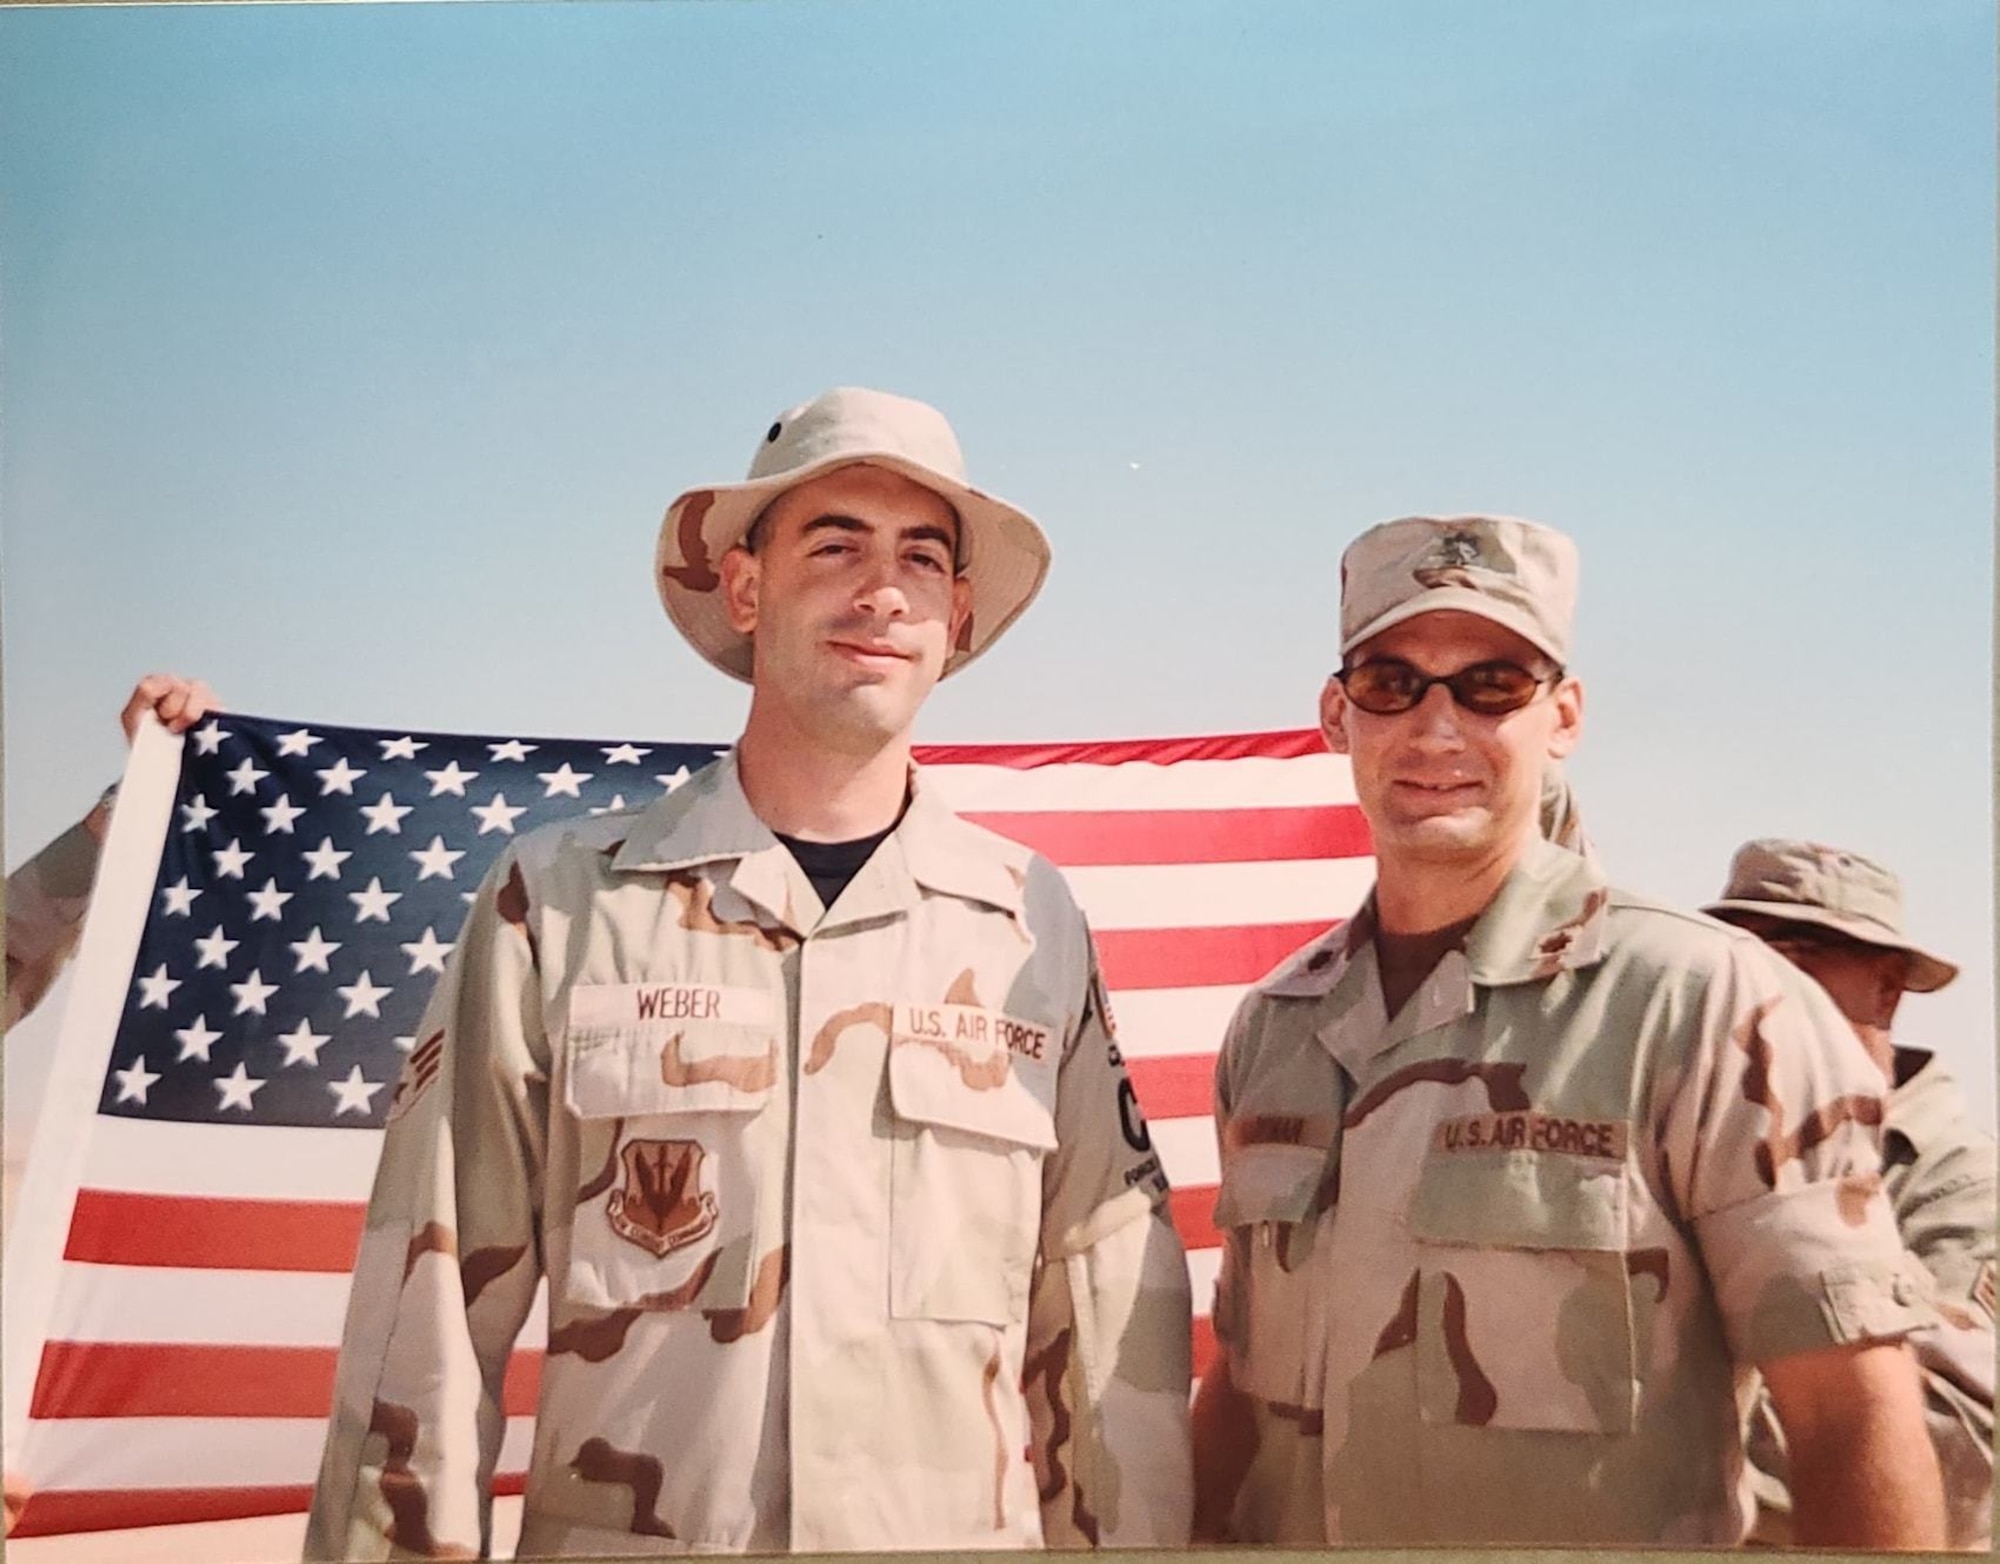 Then Senior Airman Mark Weber, left, 378th Expeditionary Civil Engineer Squadron force protection member, poses for a photo after reenlisting at Prince Sultan Air Base, Kingdom of Saudi Arabia in 2002. Following the 9/11 attacks, deployments increased, including for Weber, who deployed outside his career field in support of the global war on terrorism. (Courtesy Photo)